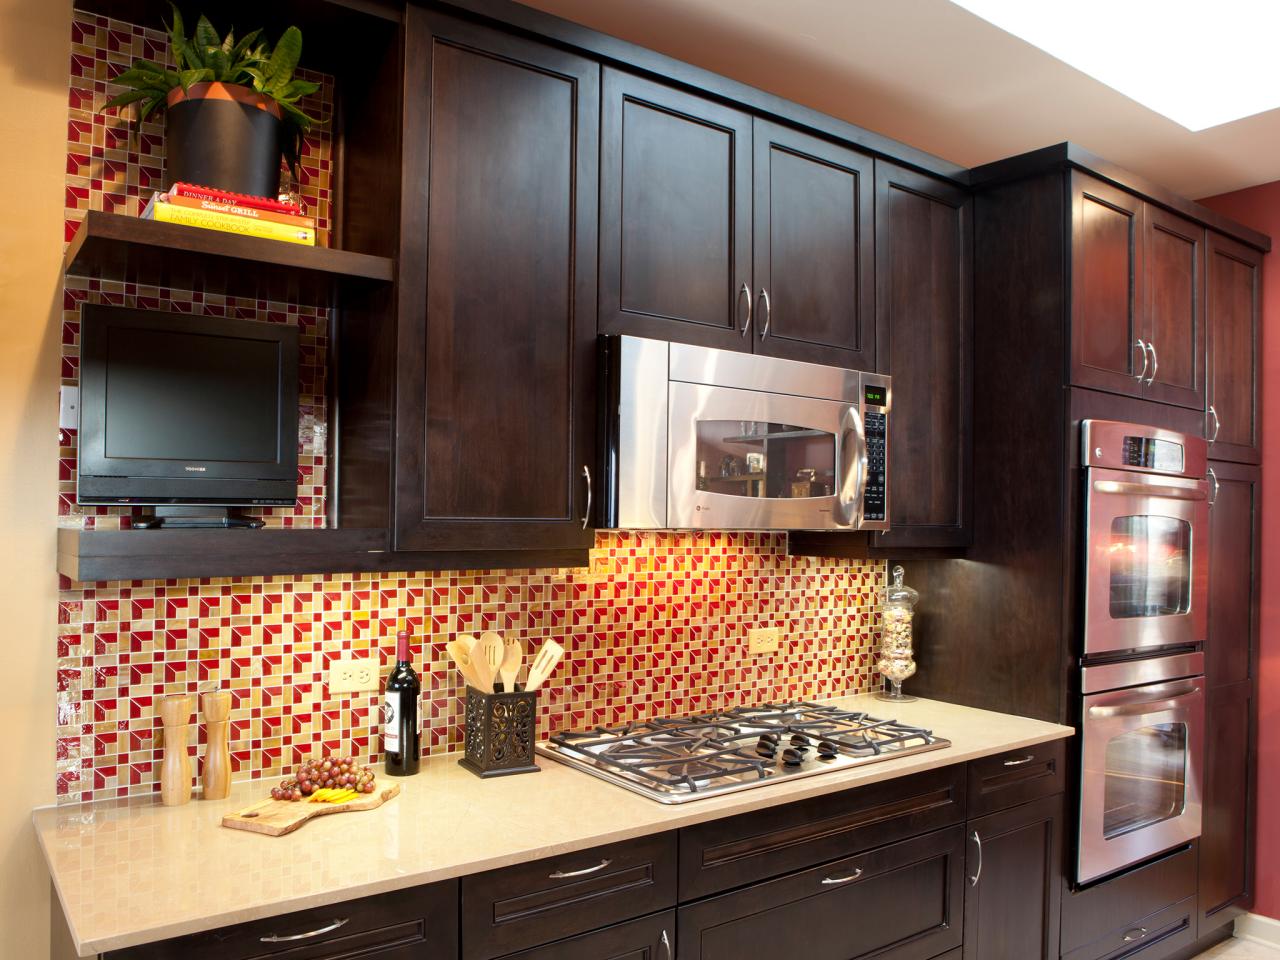 Restaining Kitchen Cabinets Pictures, Options, Tips & Ideas   HGTV